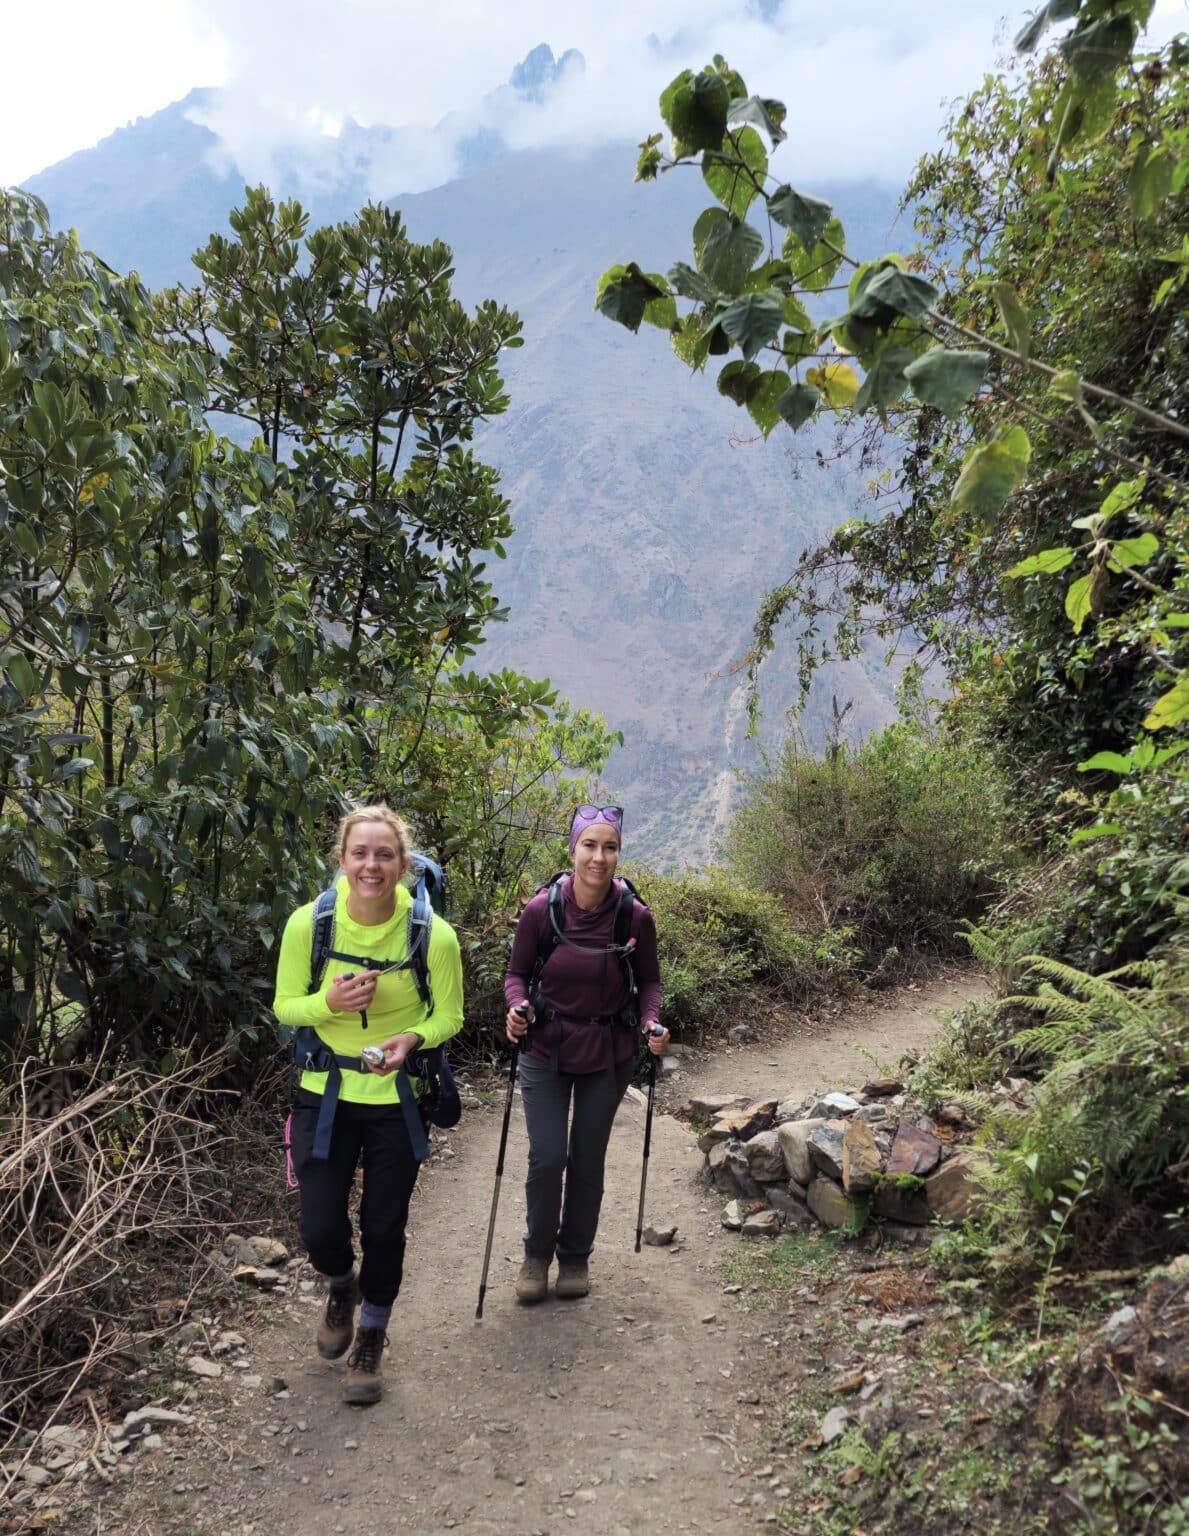 Two women hiking a trail in Peru with misty mountains in the background